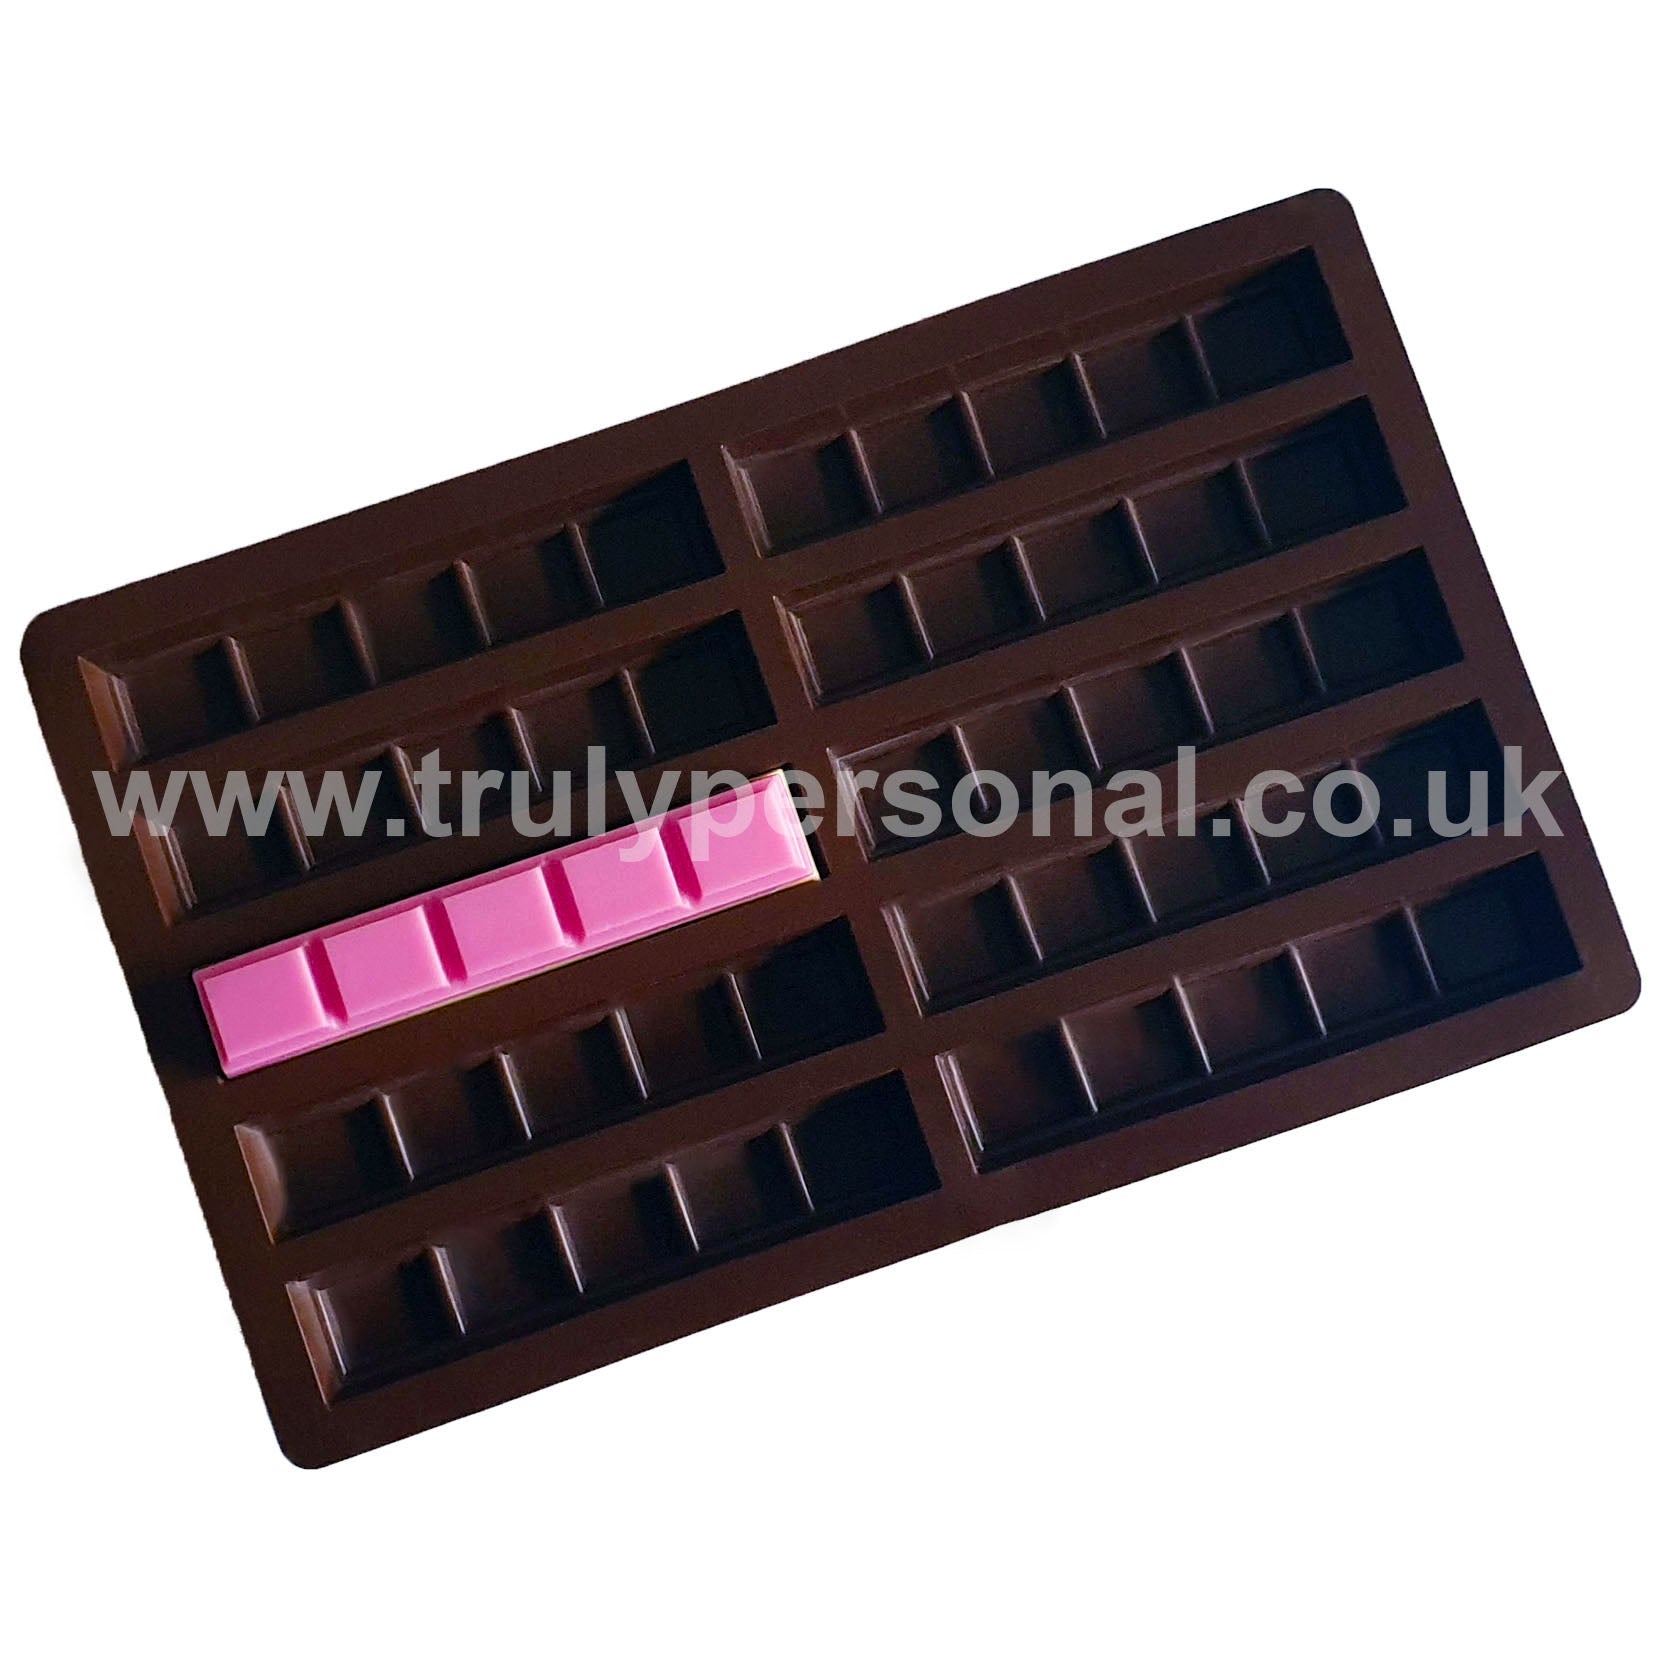 Snap Bar Silicone Mould - 10 x 5 | Wax Melts | Truly Personal Ltd